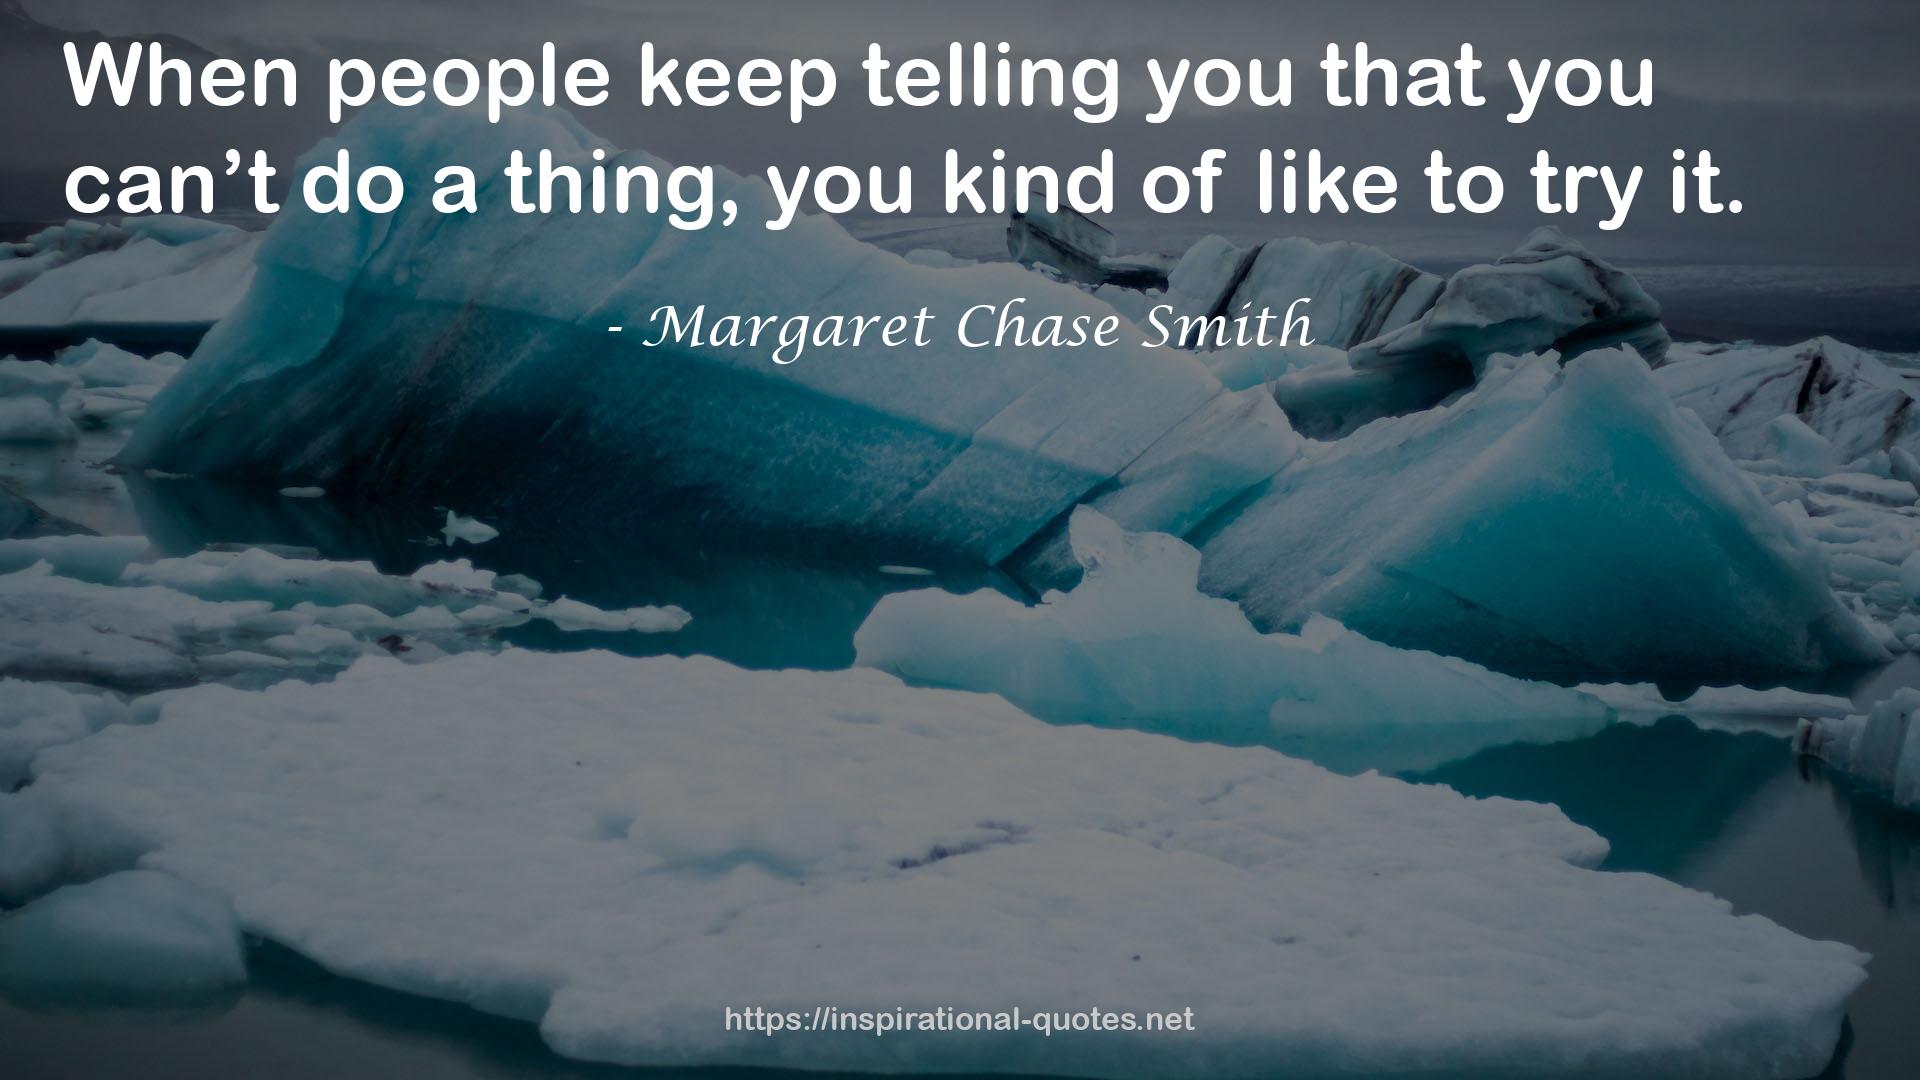 Margaret Chase Smith QUOTES